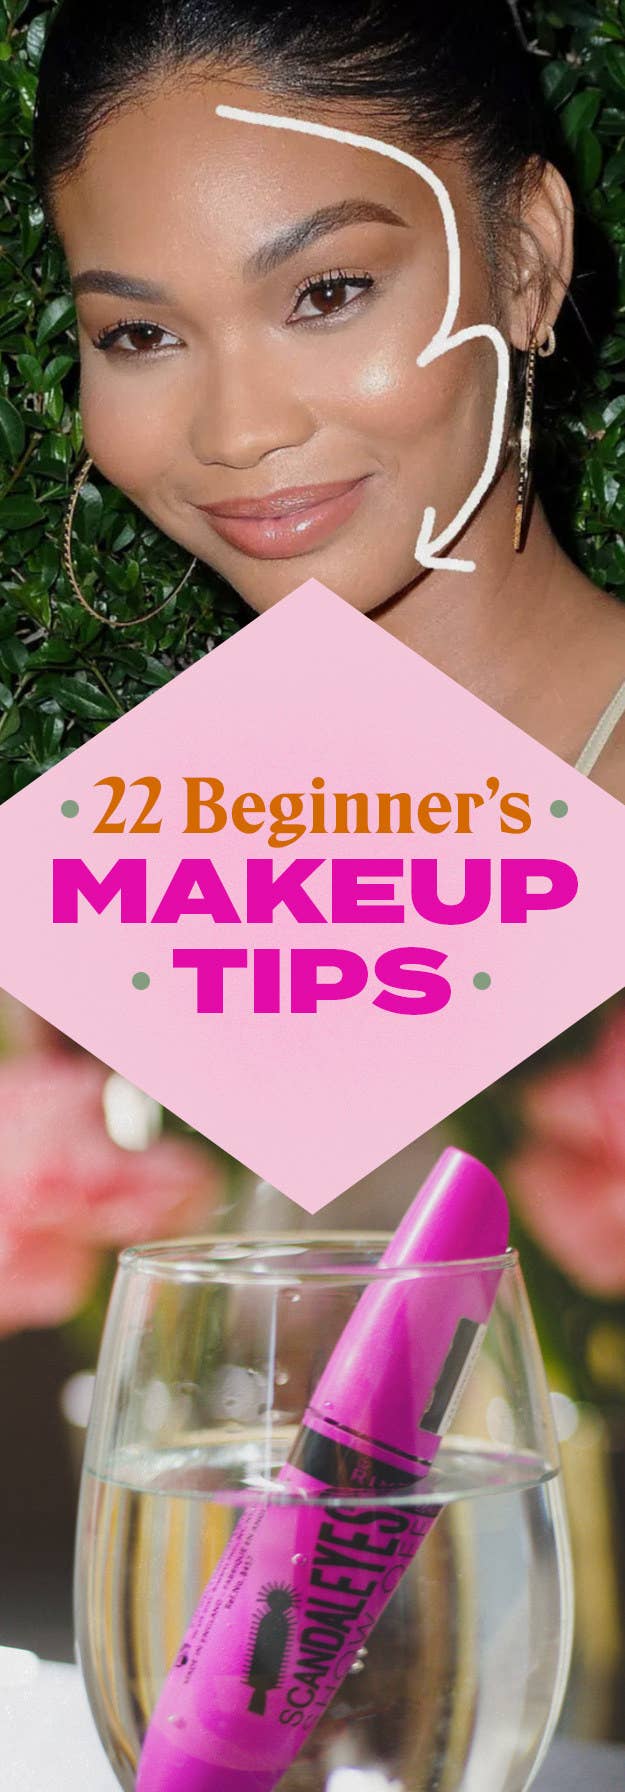 22 Makeup Tricks Every Beginner Should Know